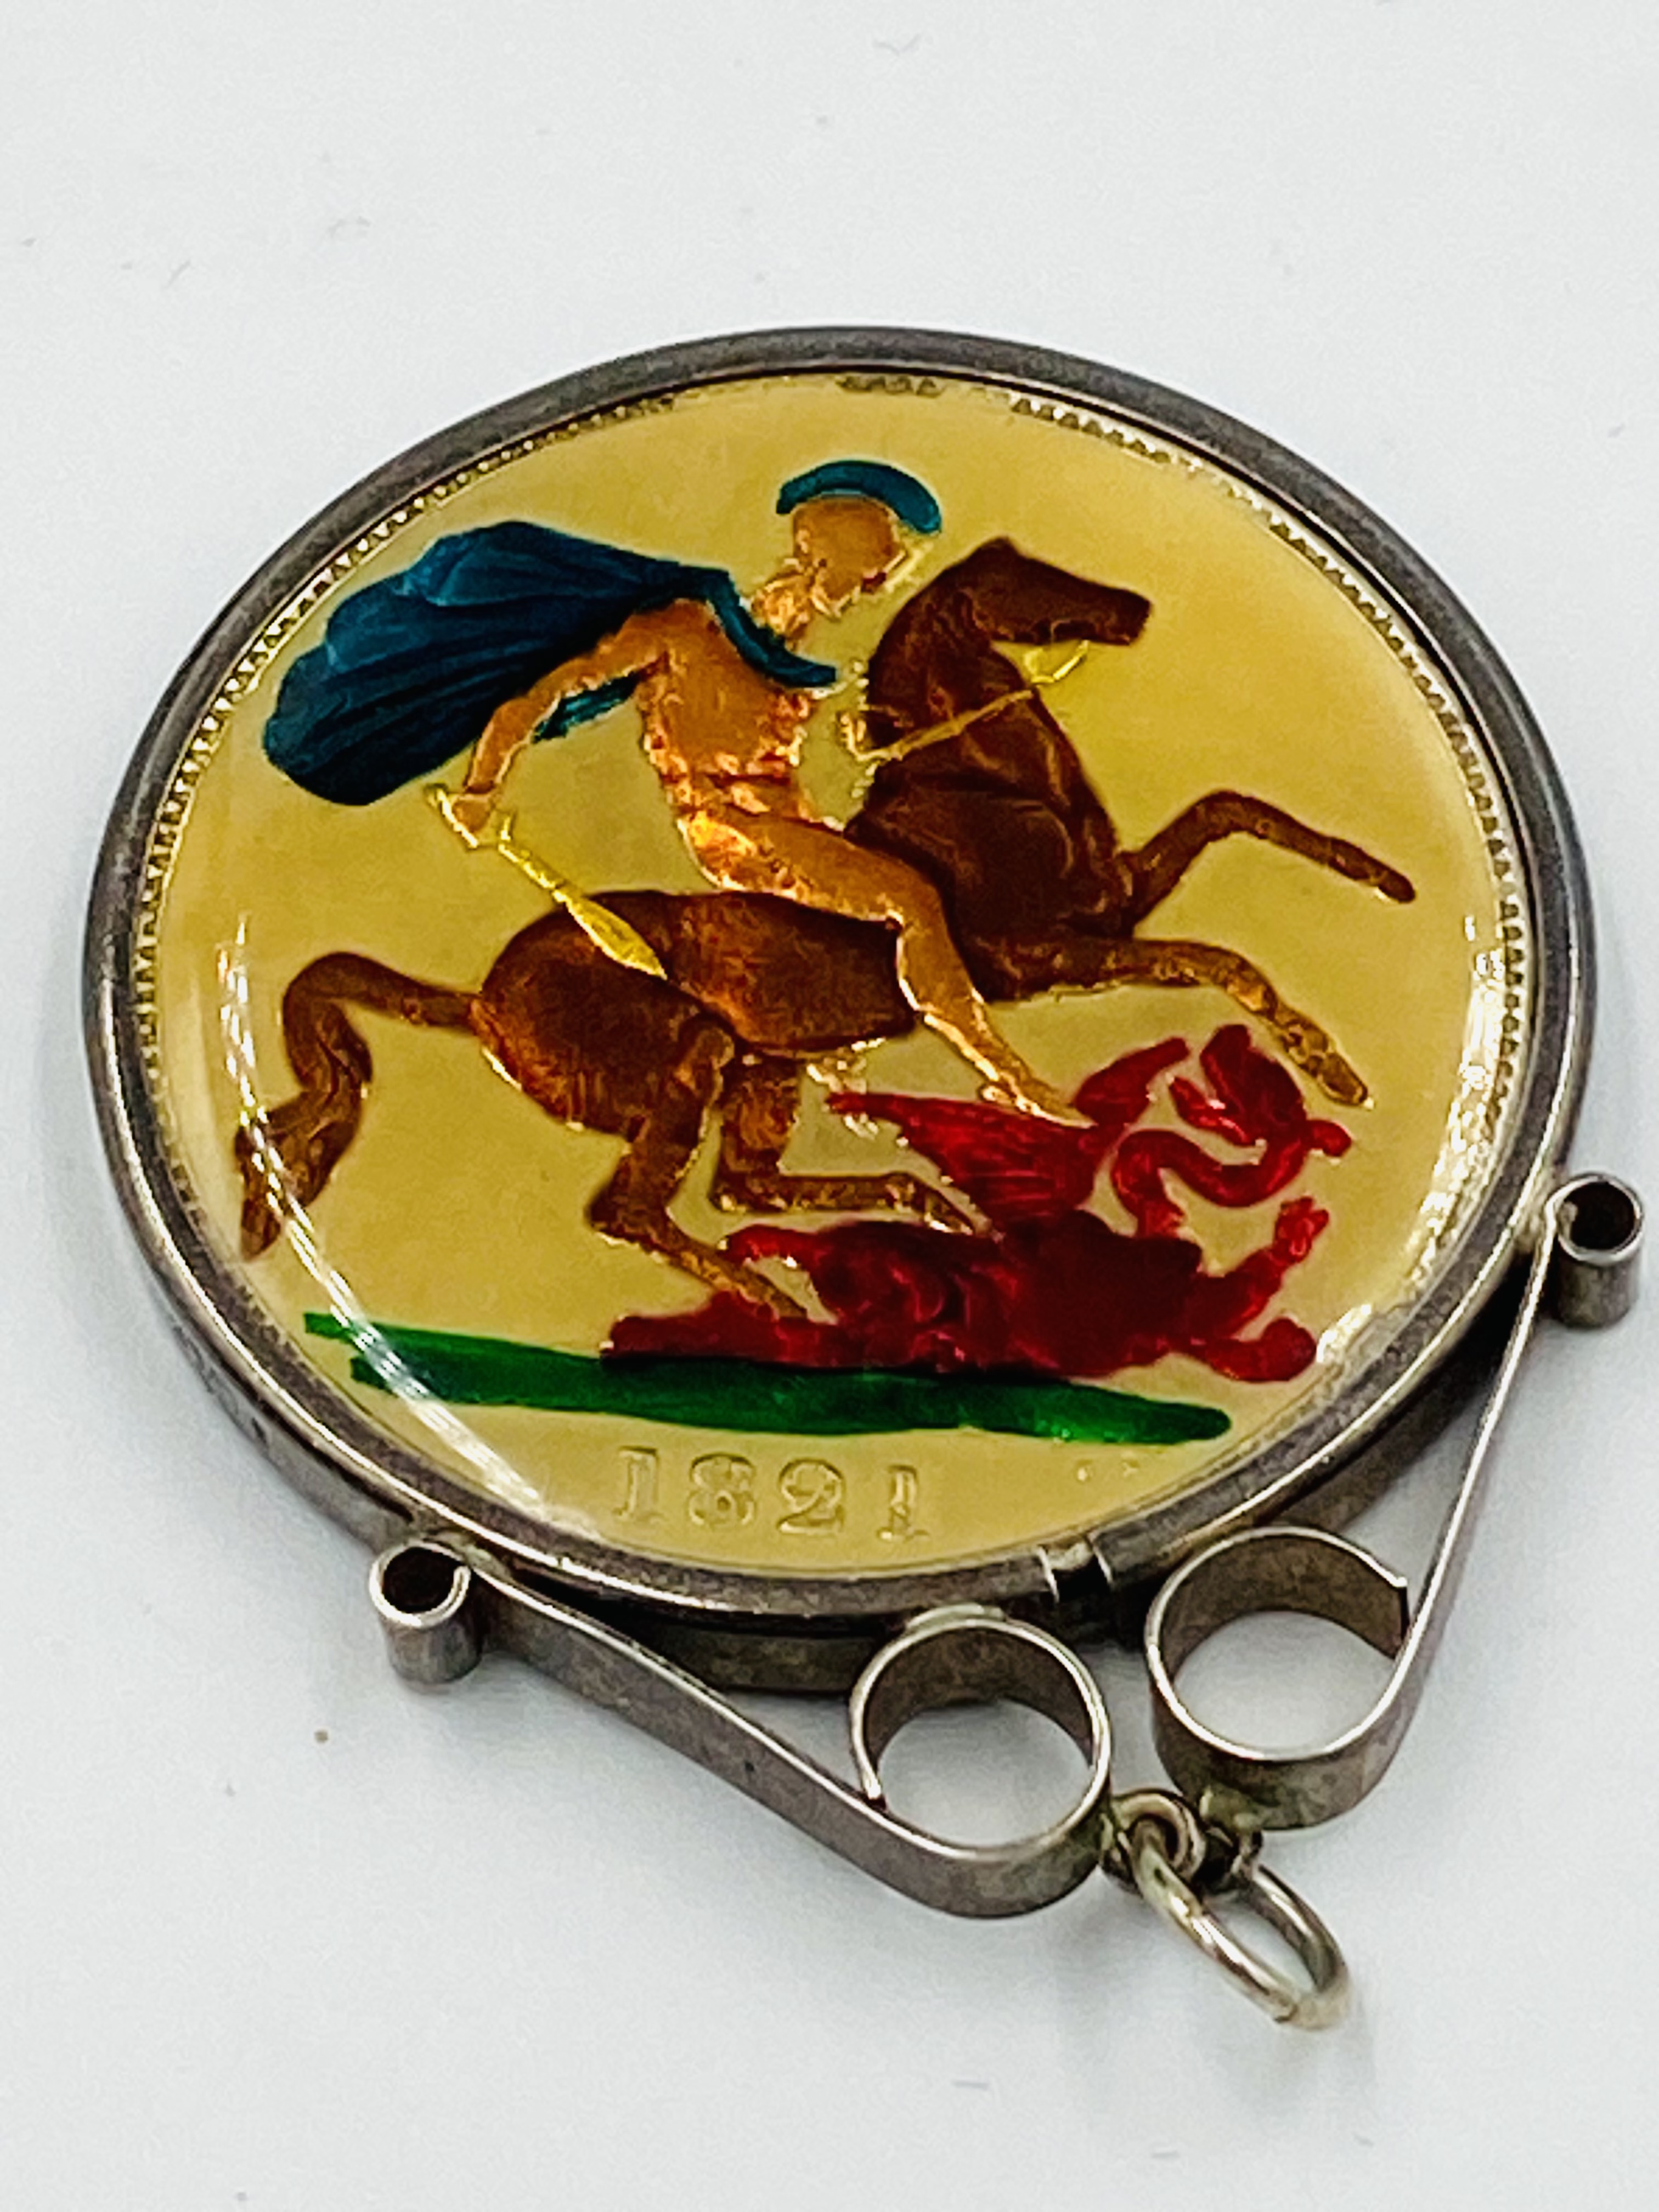 George IV enameled crown, 1821, in silver pendant mount - Image 2 of 3